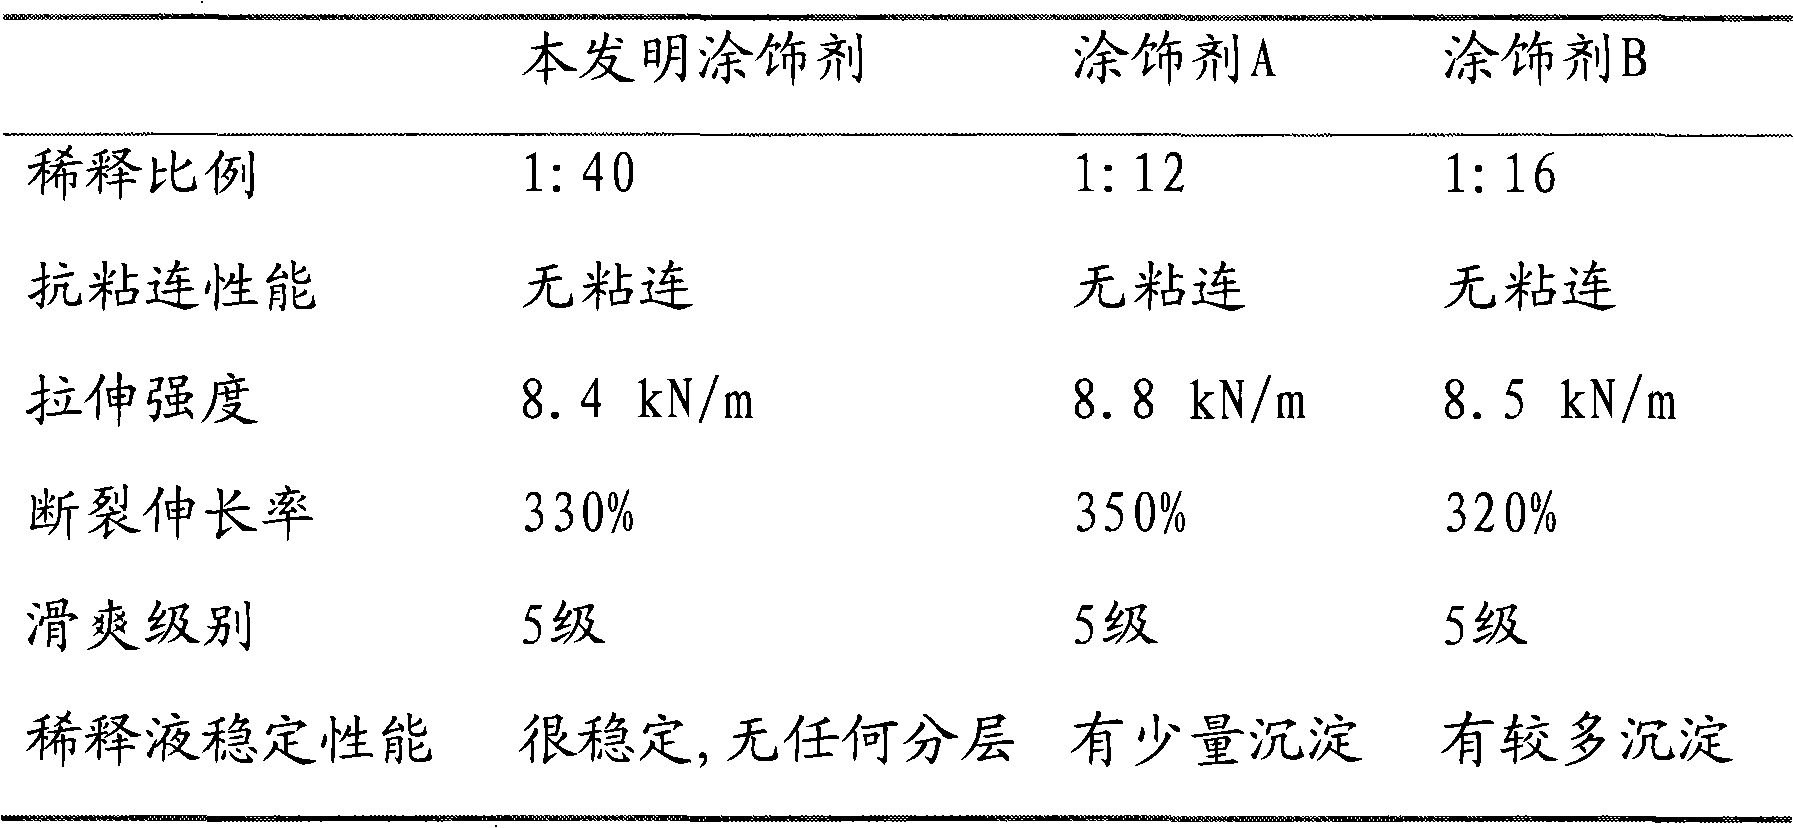 High dilution ratio aqueous coating agent for PVC powder-free gloves and preparation method thereof